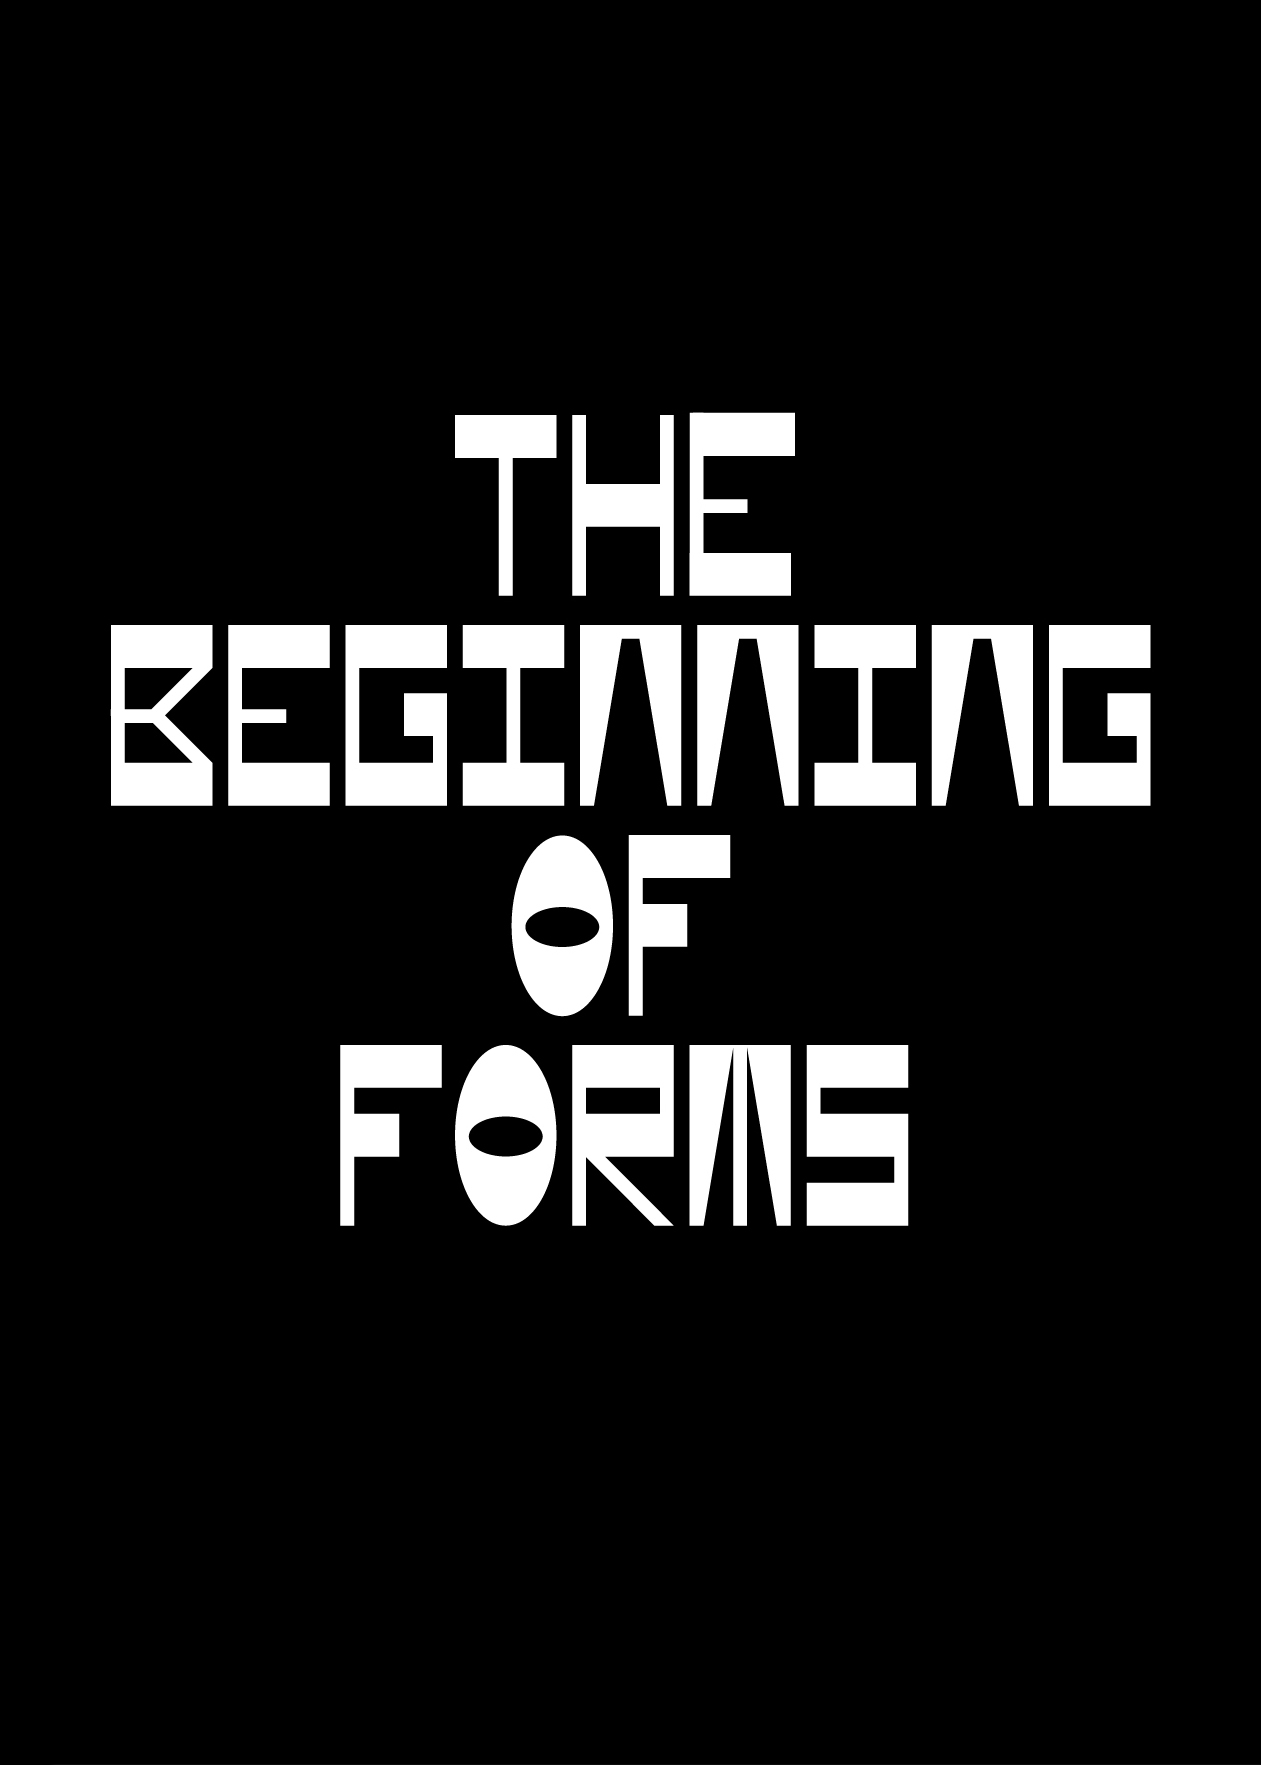 Beginning of Forms